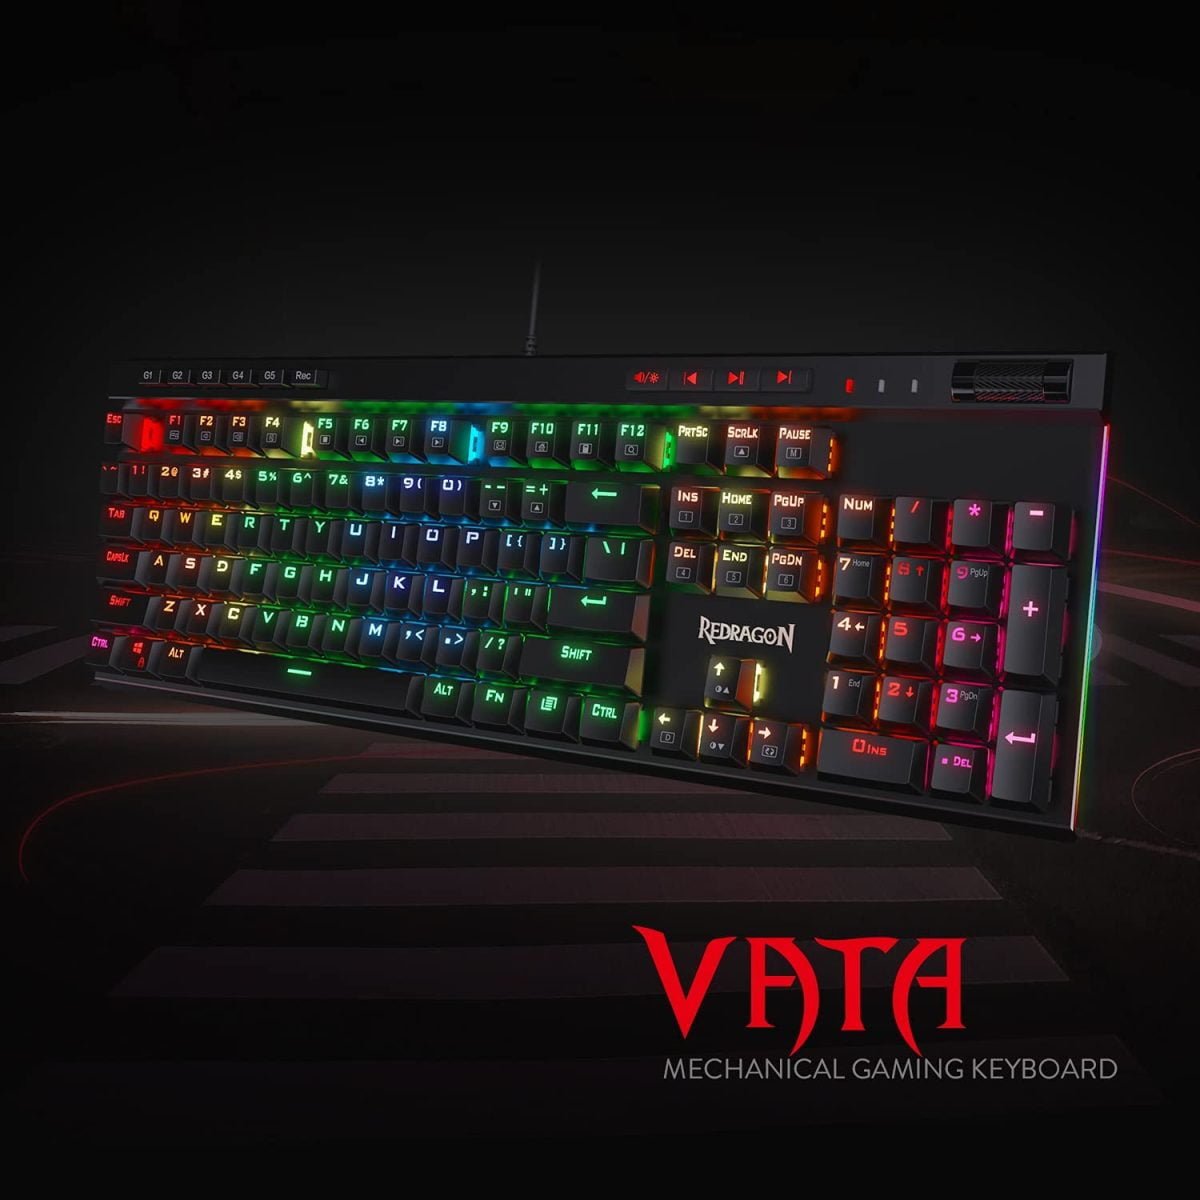 61Z0Emd9Ugs. Ac Sl1500 Redragon &Lt;H1 Id=&Quot;Title&Quot; Class=&Quot;A-Size-Large A-Spacing-None&Quot;&Gt;Redragon K580 Vata Rgb Led Backlit Mechanical Gaming Keyboard&Lt;/H1&Gt; &Lt;Ul Class=&Quot;A-Unordered-List A-Vertical A-Spacing-Mini&Quot;&Gt; &Lt;Li&Gt;&Lt;Span Class=&Quot;A-List-Item&Quot;&Gt;5 Macro Keys: There Are 5 Programmable Macro Keys(G1~G5) On The Keyboard Which Can Be Recorded Macros On The Fly Without Any Additional Software Required To Be Installed. Easy To Edit And Diy Your Stylish Keyboard.&Lt;/Span&Gt;&Lt;/Li&Gt; &Lt;Li&Gt;&Lt;Span Class=&Quot;A-List-Item&Quot;&Gt;Dedicated Multimedia Controls: The Multimedia Controls Let You Quickly Play, Pause, Skip The Music Right From The Keyboard Without Interrupting Your Game. Also, Designed With A Volume/Backlight Adjust Wheel, It'S Easy To Adjust Volume Or Backlight Brightness Directly With The Wheel In The Upper Right Side Of The Keyboard. Very Convenient And Cool Looking.&Lt;/Span&Gt;&Lt;/Li&Gt; &Lt;Li&Gt;&Lt;Span Class=&Quot;A-List-Item&Quot;&Gt;N-Key Rollover: 104 Keys Anti-Ghosting Allows You To Simultaneously Click Multiple Keys. The Floating Keys And Redragon Blue Switches Will Give You A Great Gaming Experience With Fast Response And Nice Clicky Sound.&Lt;/Span&Gt;&Lt;/Li&Gt; &Lt;Li&Gt;&Lt;Span Class=&Quot;A-List-Item&Quot;&Gt;Durability: 50 Million Times Keystroke Test, 60G Actuation Force, And 2.3 Mm Short Travel. Special Double-Shot Injection Molded Keycaps Never Fade Key Font With Waterproof And Dust Resistant Mechanical Switch.&Lt;/Span&Gt;&Lt;/Li&Gt; &Lt;Li&Gt;&Lt;Span Class=&Quot;A-List-Item&Quot;&Gt;Rgb Backlight: 18 Backlight Models Allow You To Type In The Dark. You Can Adjust Its Brightness With A Control Wheel Or Fn + Up/Down. 5 Modes Of Rgb Side Edge Lighting. The Color Of Each Key Lighting On The Keyboard Can Be Customized Easily Without Installing Software, A Great Choice To Diy Your Stylish Keyboard.&Lt;/Span&Gt;&Lt;/Li&Gt; &Lt;/Ul&Gt; Gaming Keyboard Redragon K580 Gaming Keyboard